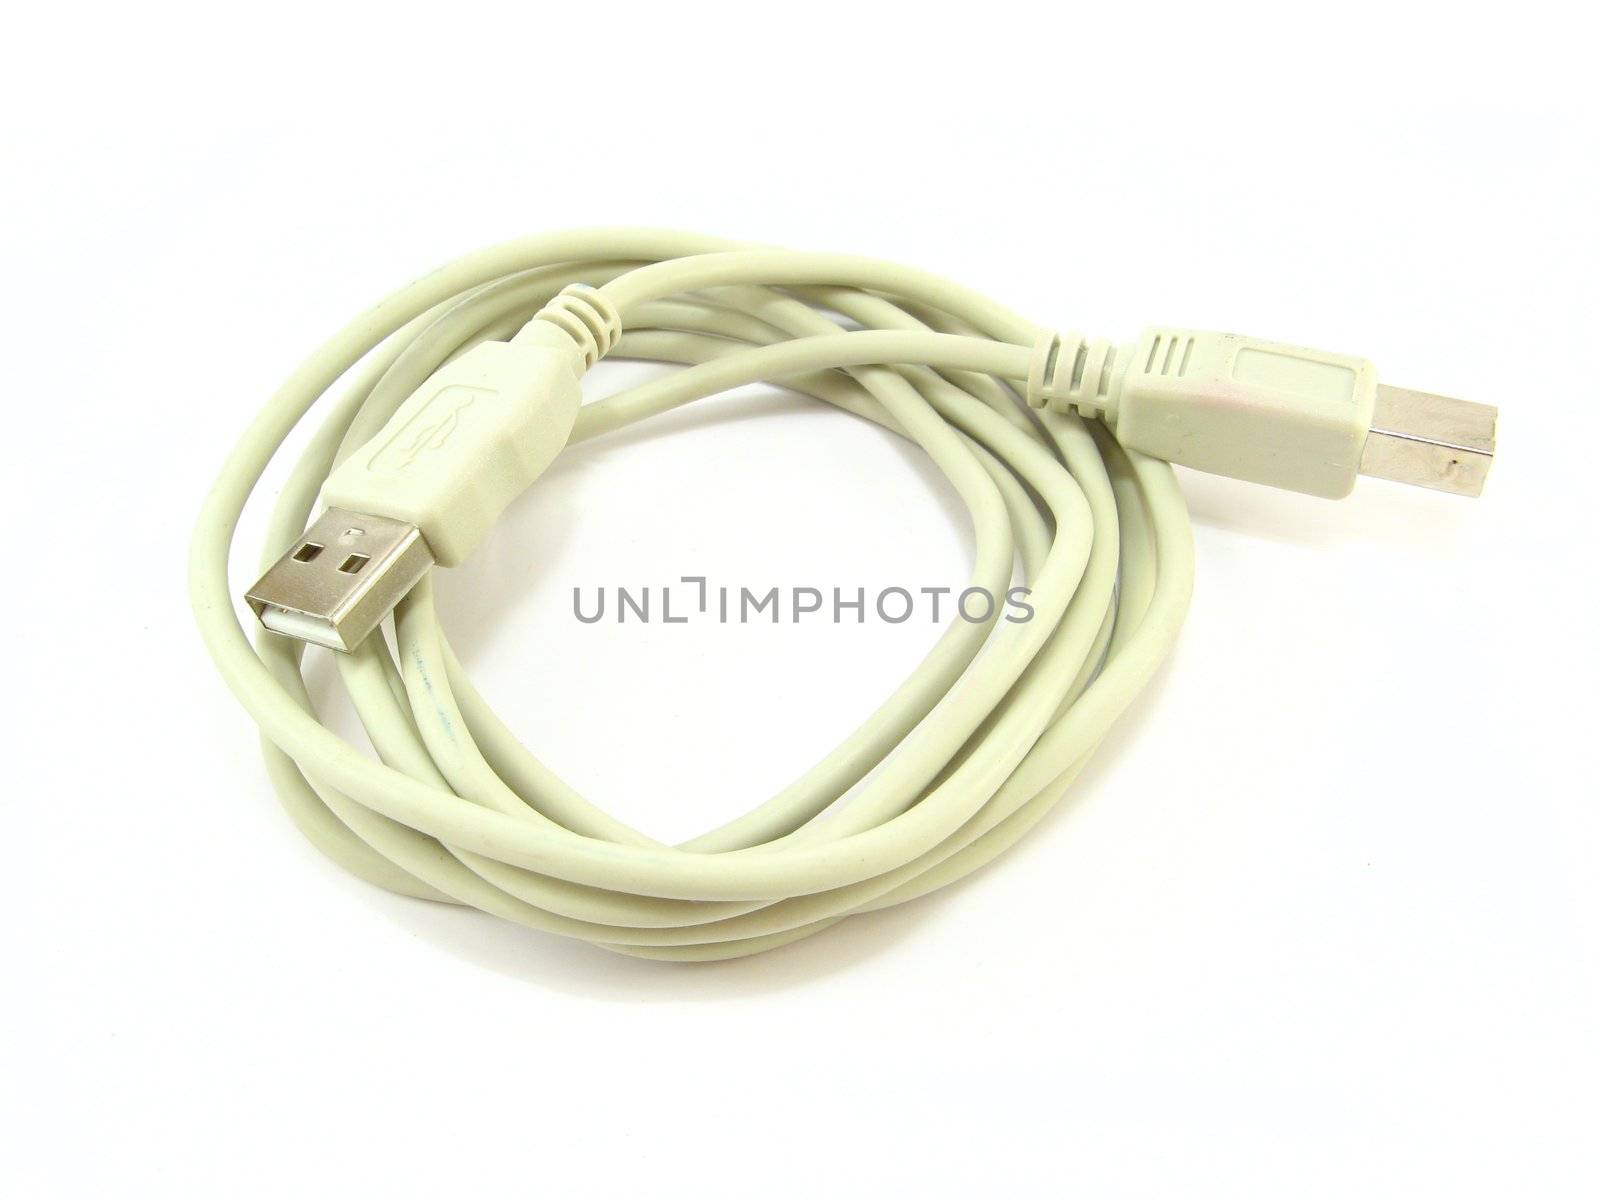 Image of usb cable on a white background